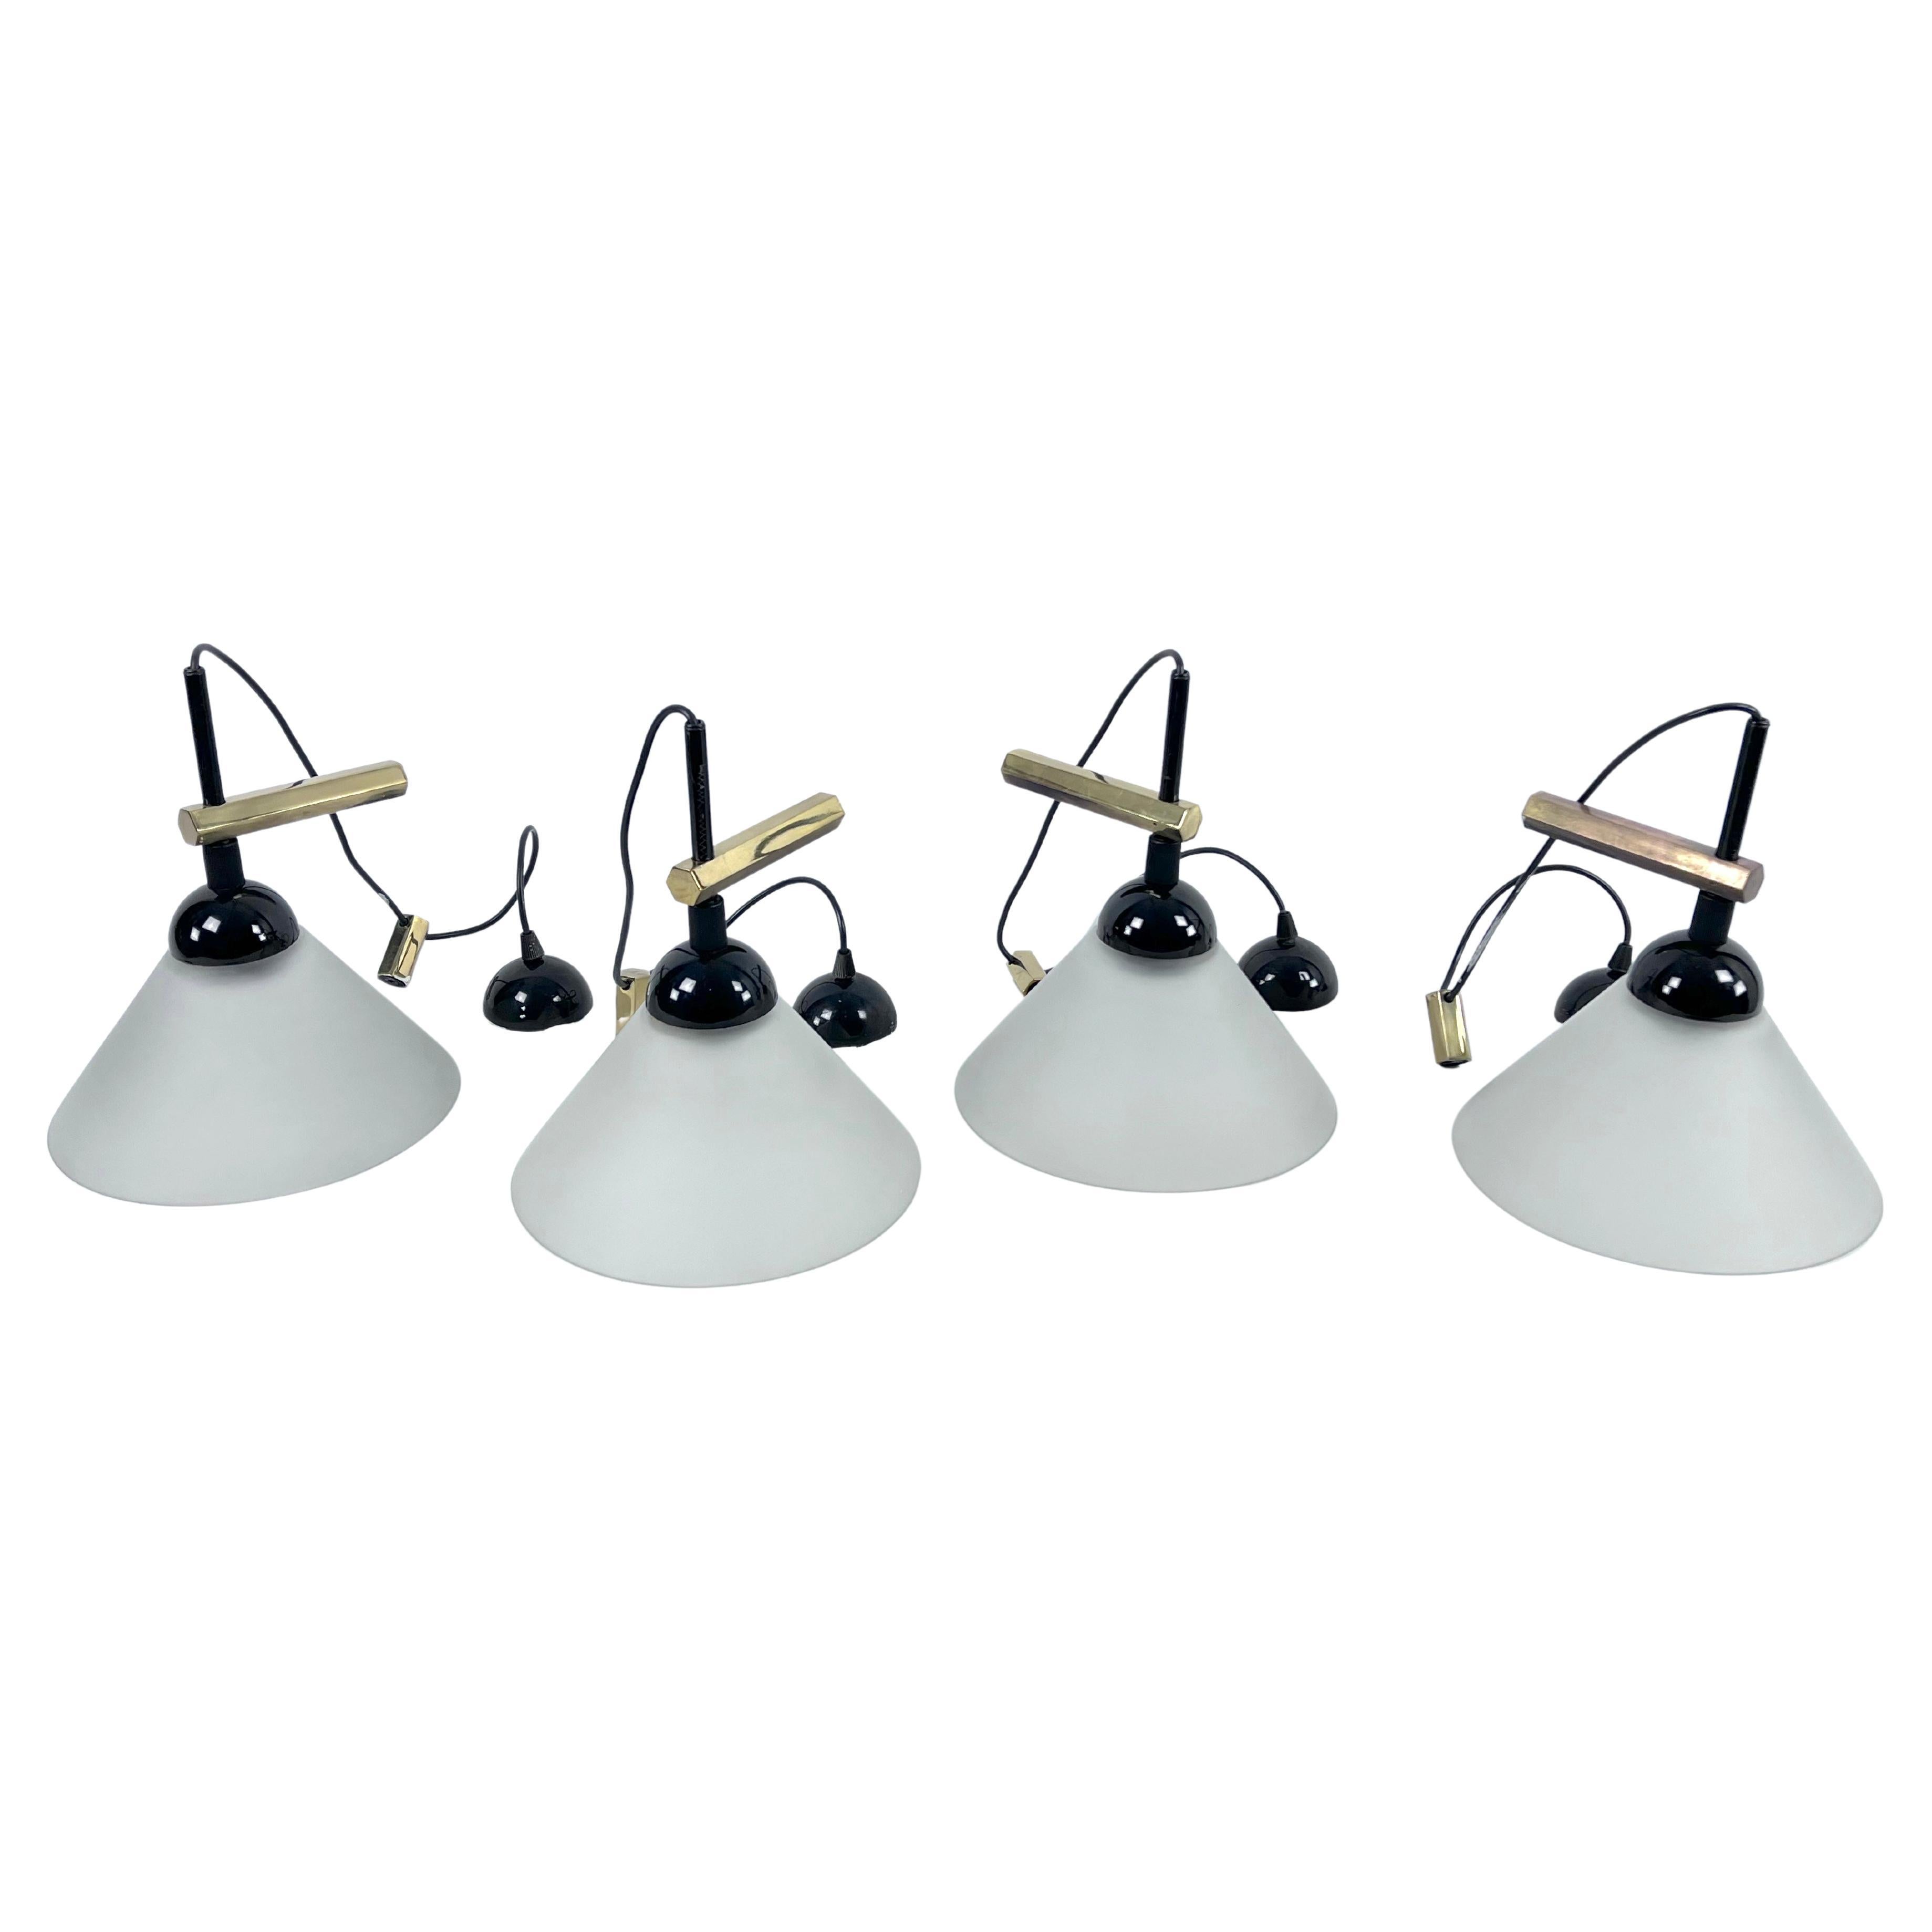 Set of Four Italian Modern Brass and Murano Glass Wall Lamps by Quattrifolio